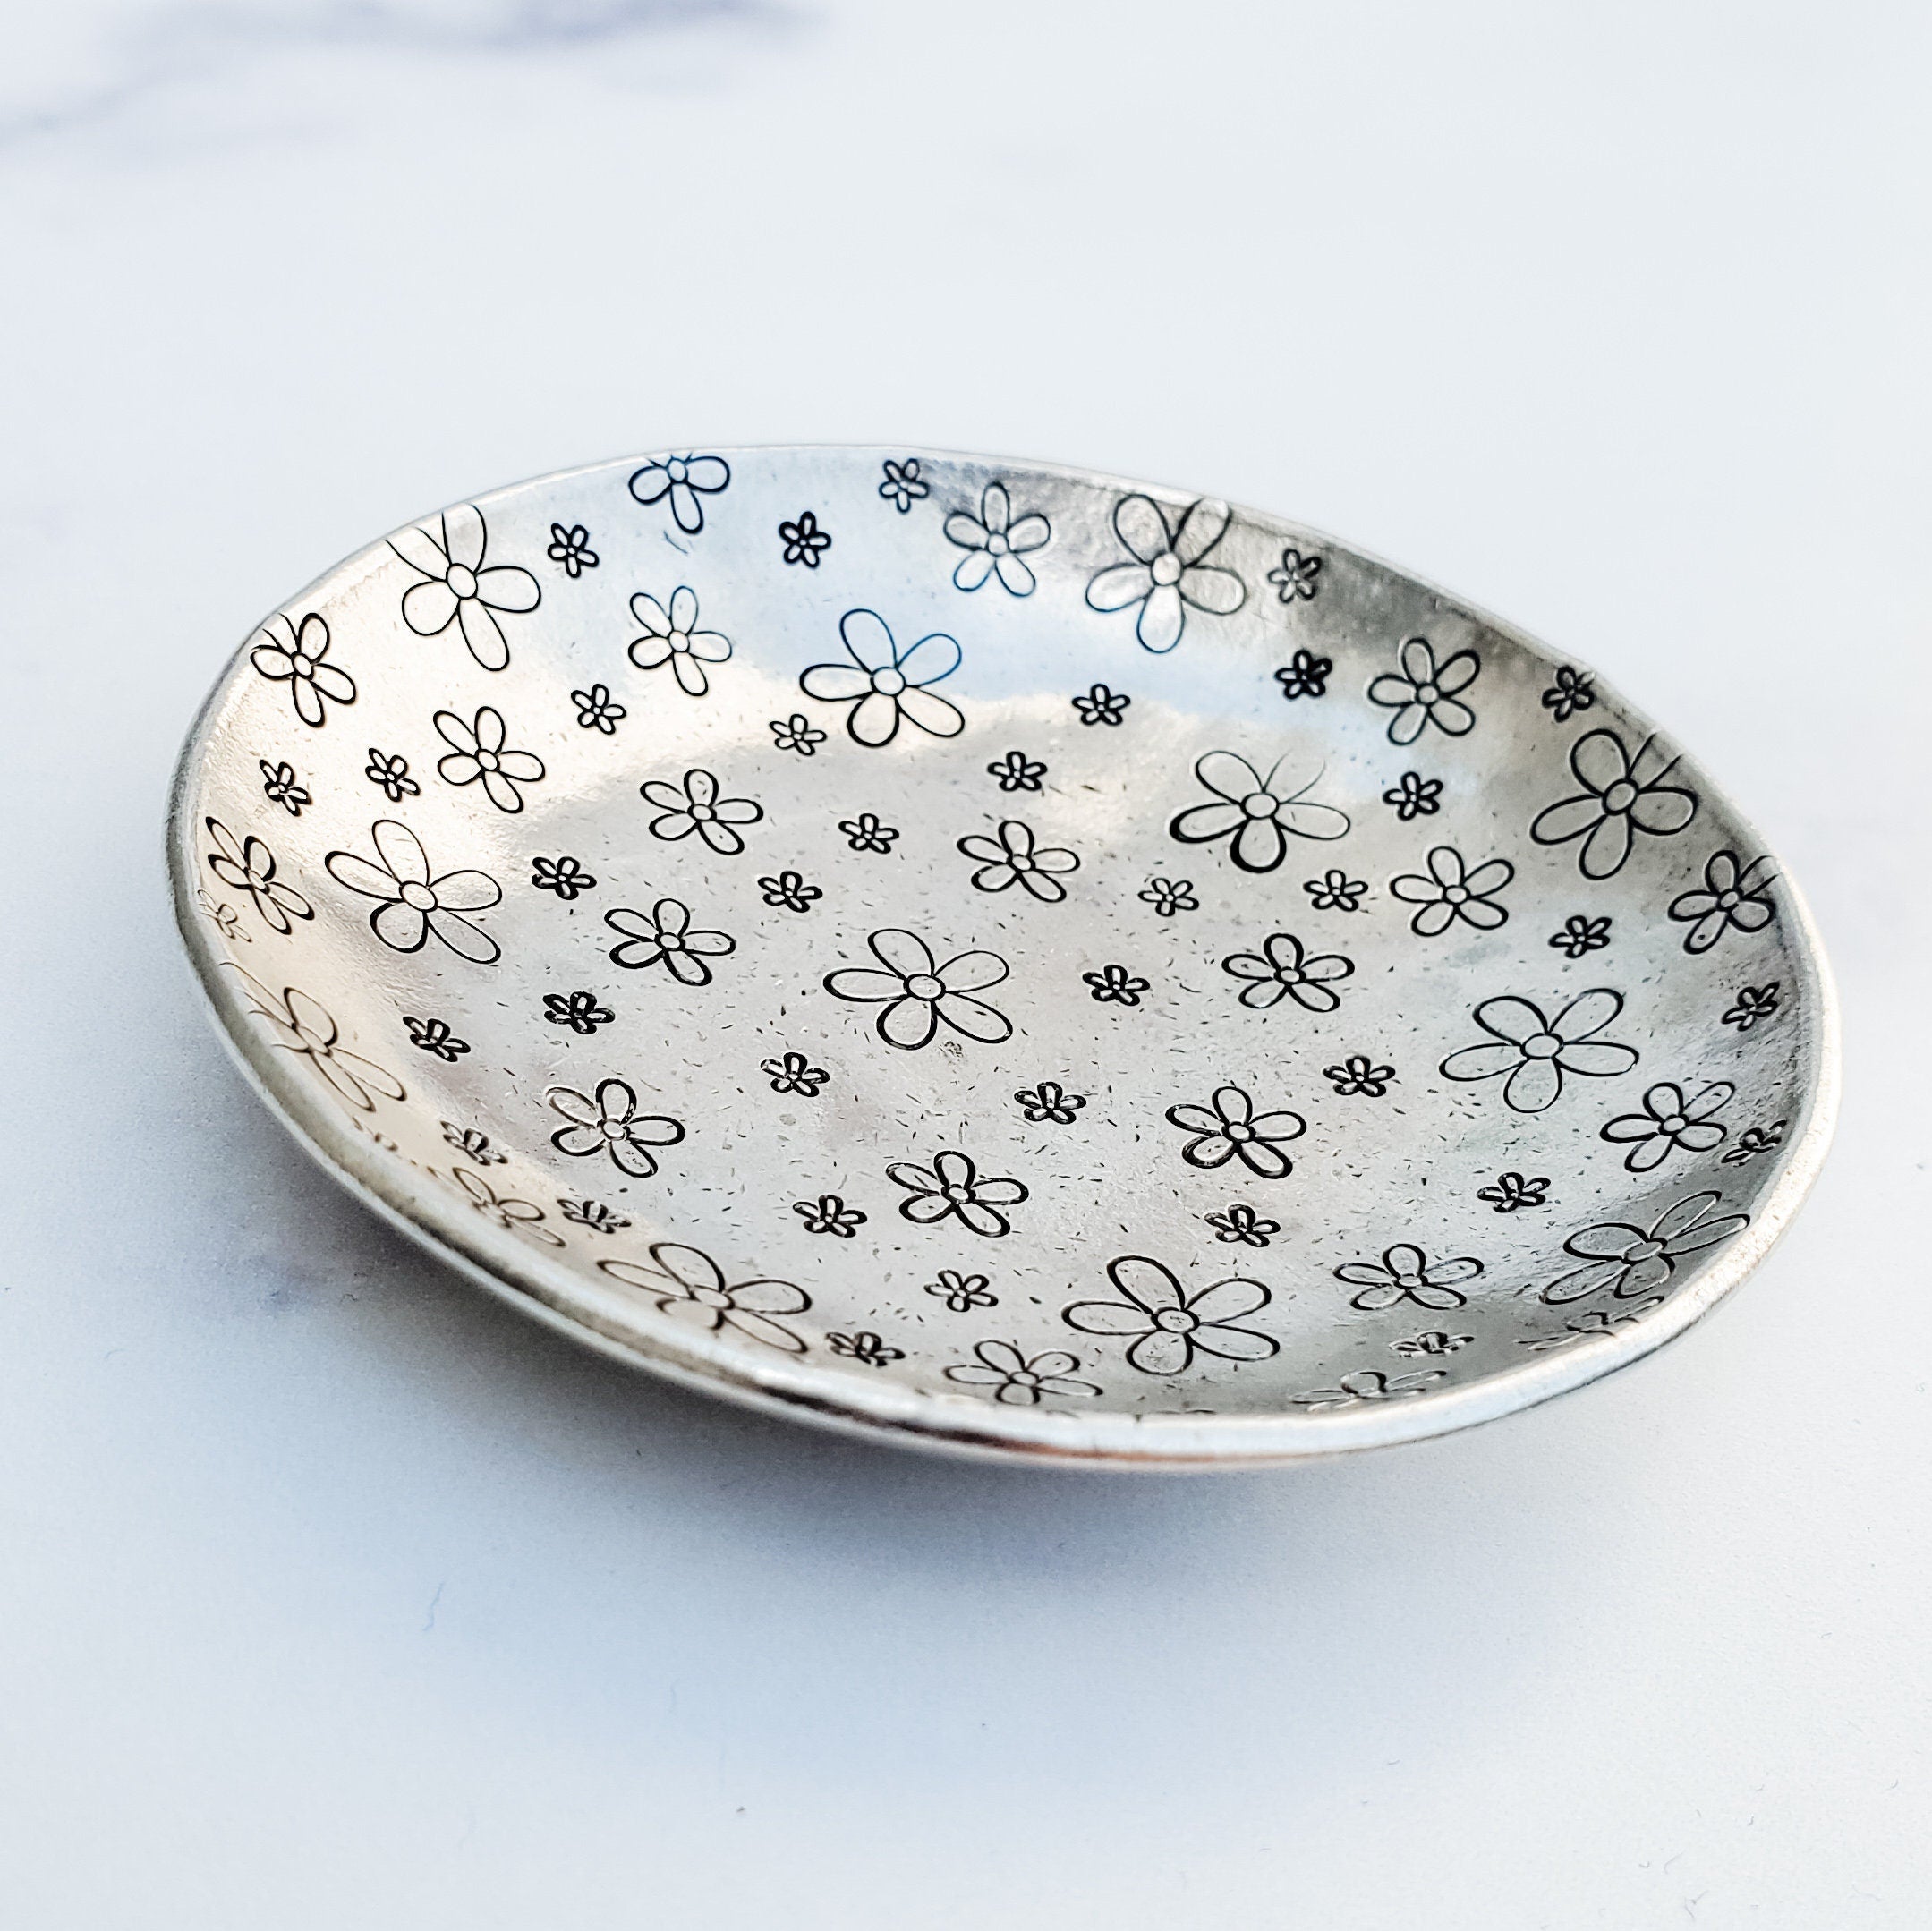 Daisy Ring Dish - Pewter Flower Trinket Dish - Ring Dish for Daisy Lover - Personalized Flower Ring Dish for Mom - Birthday Gift for Her